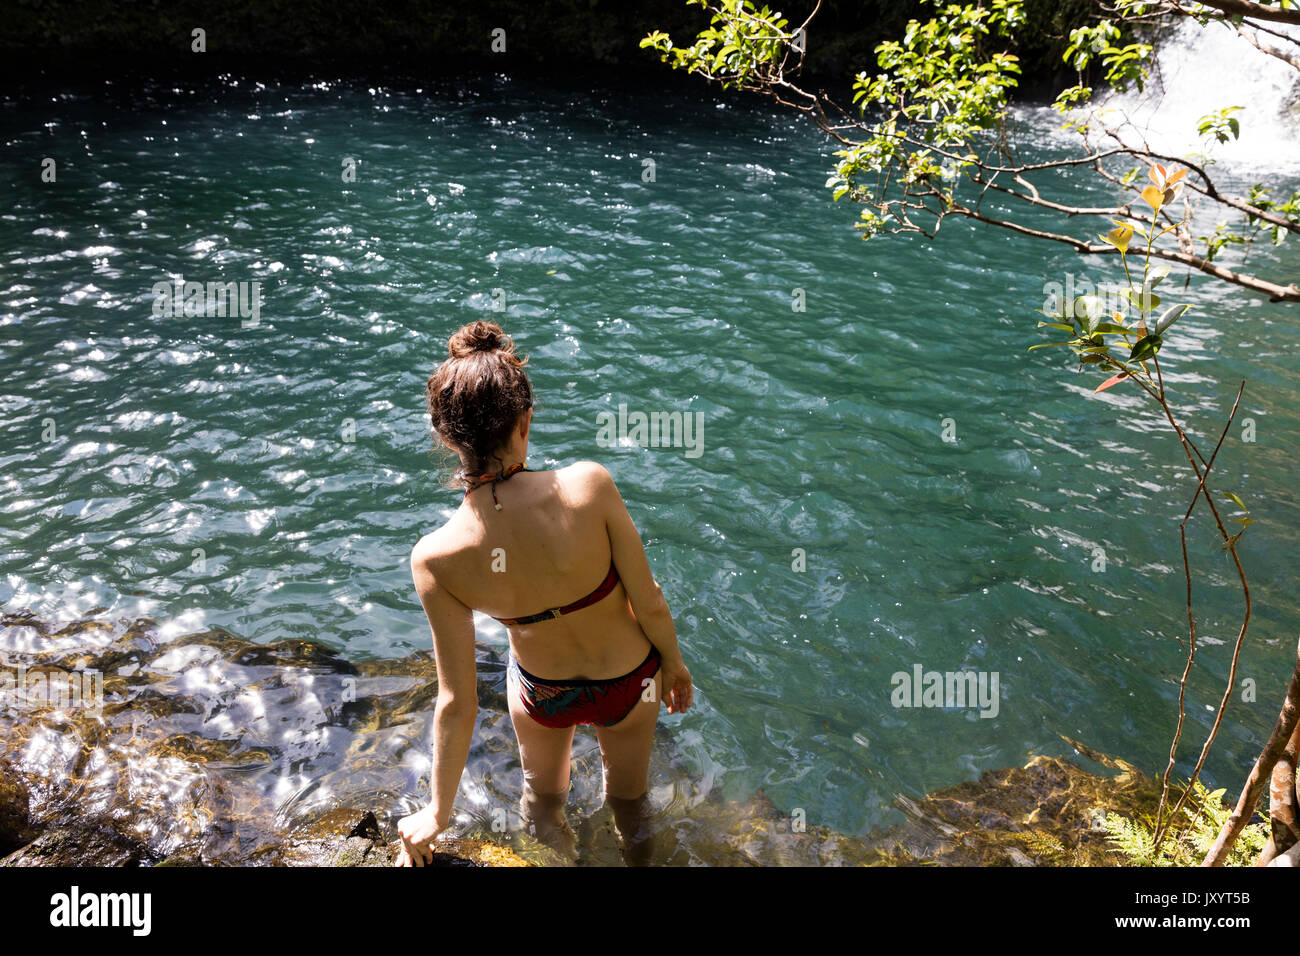 Caucasian woman wading in pool near waterfall Banque D'Images